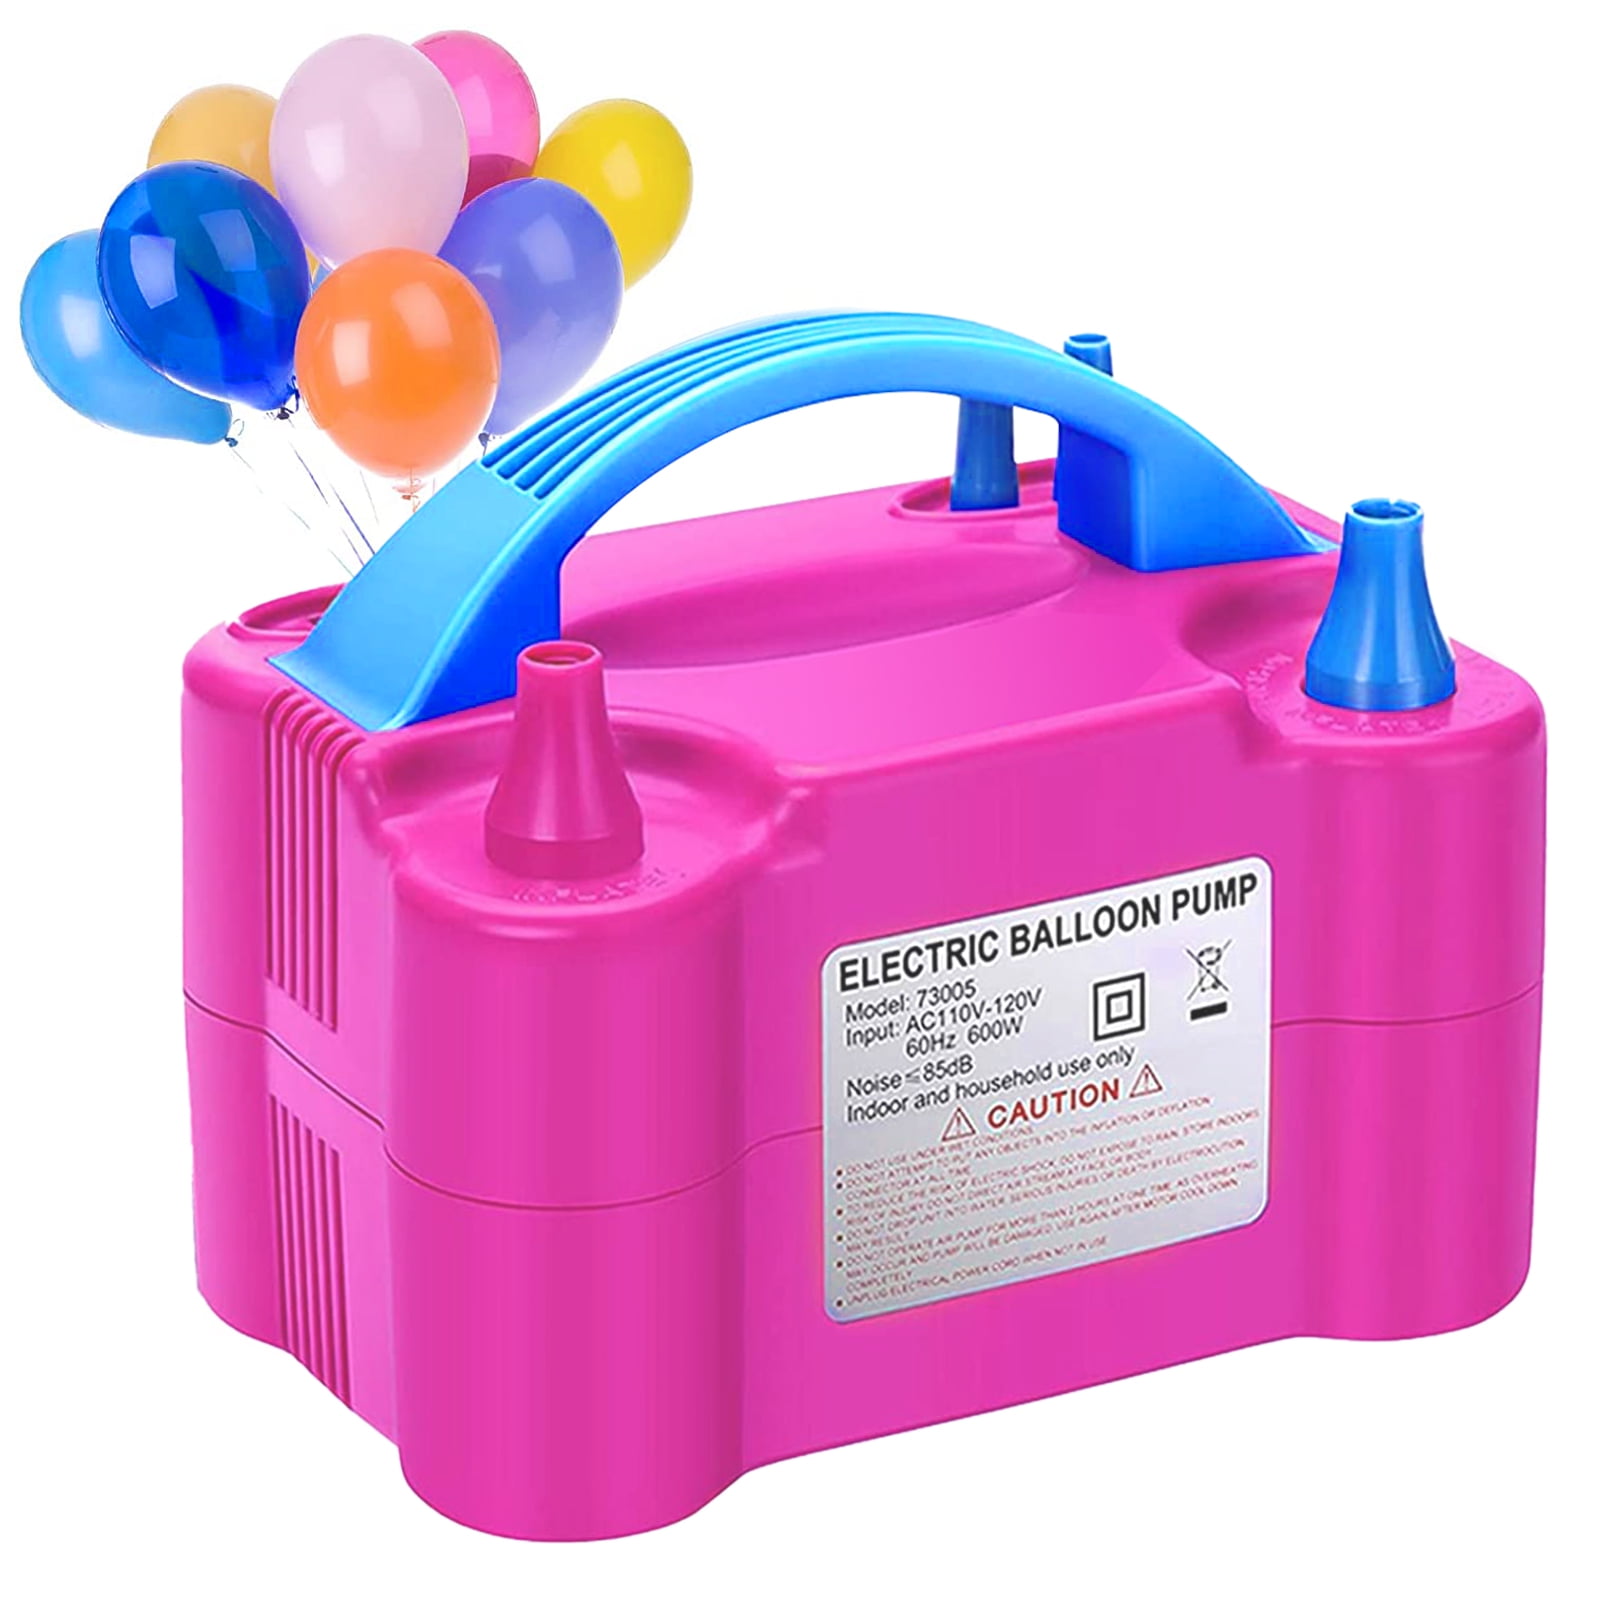 Plastic Pink,Blue Birthday Party Electric Balloon Pump, For